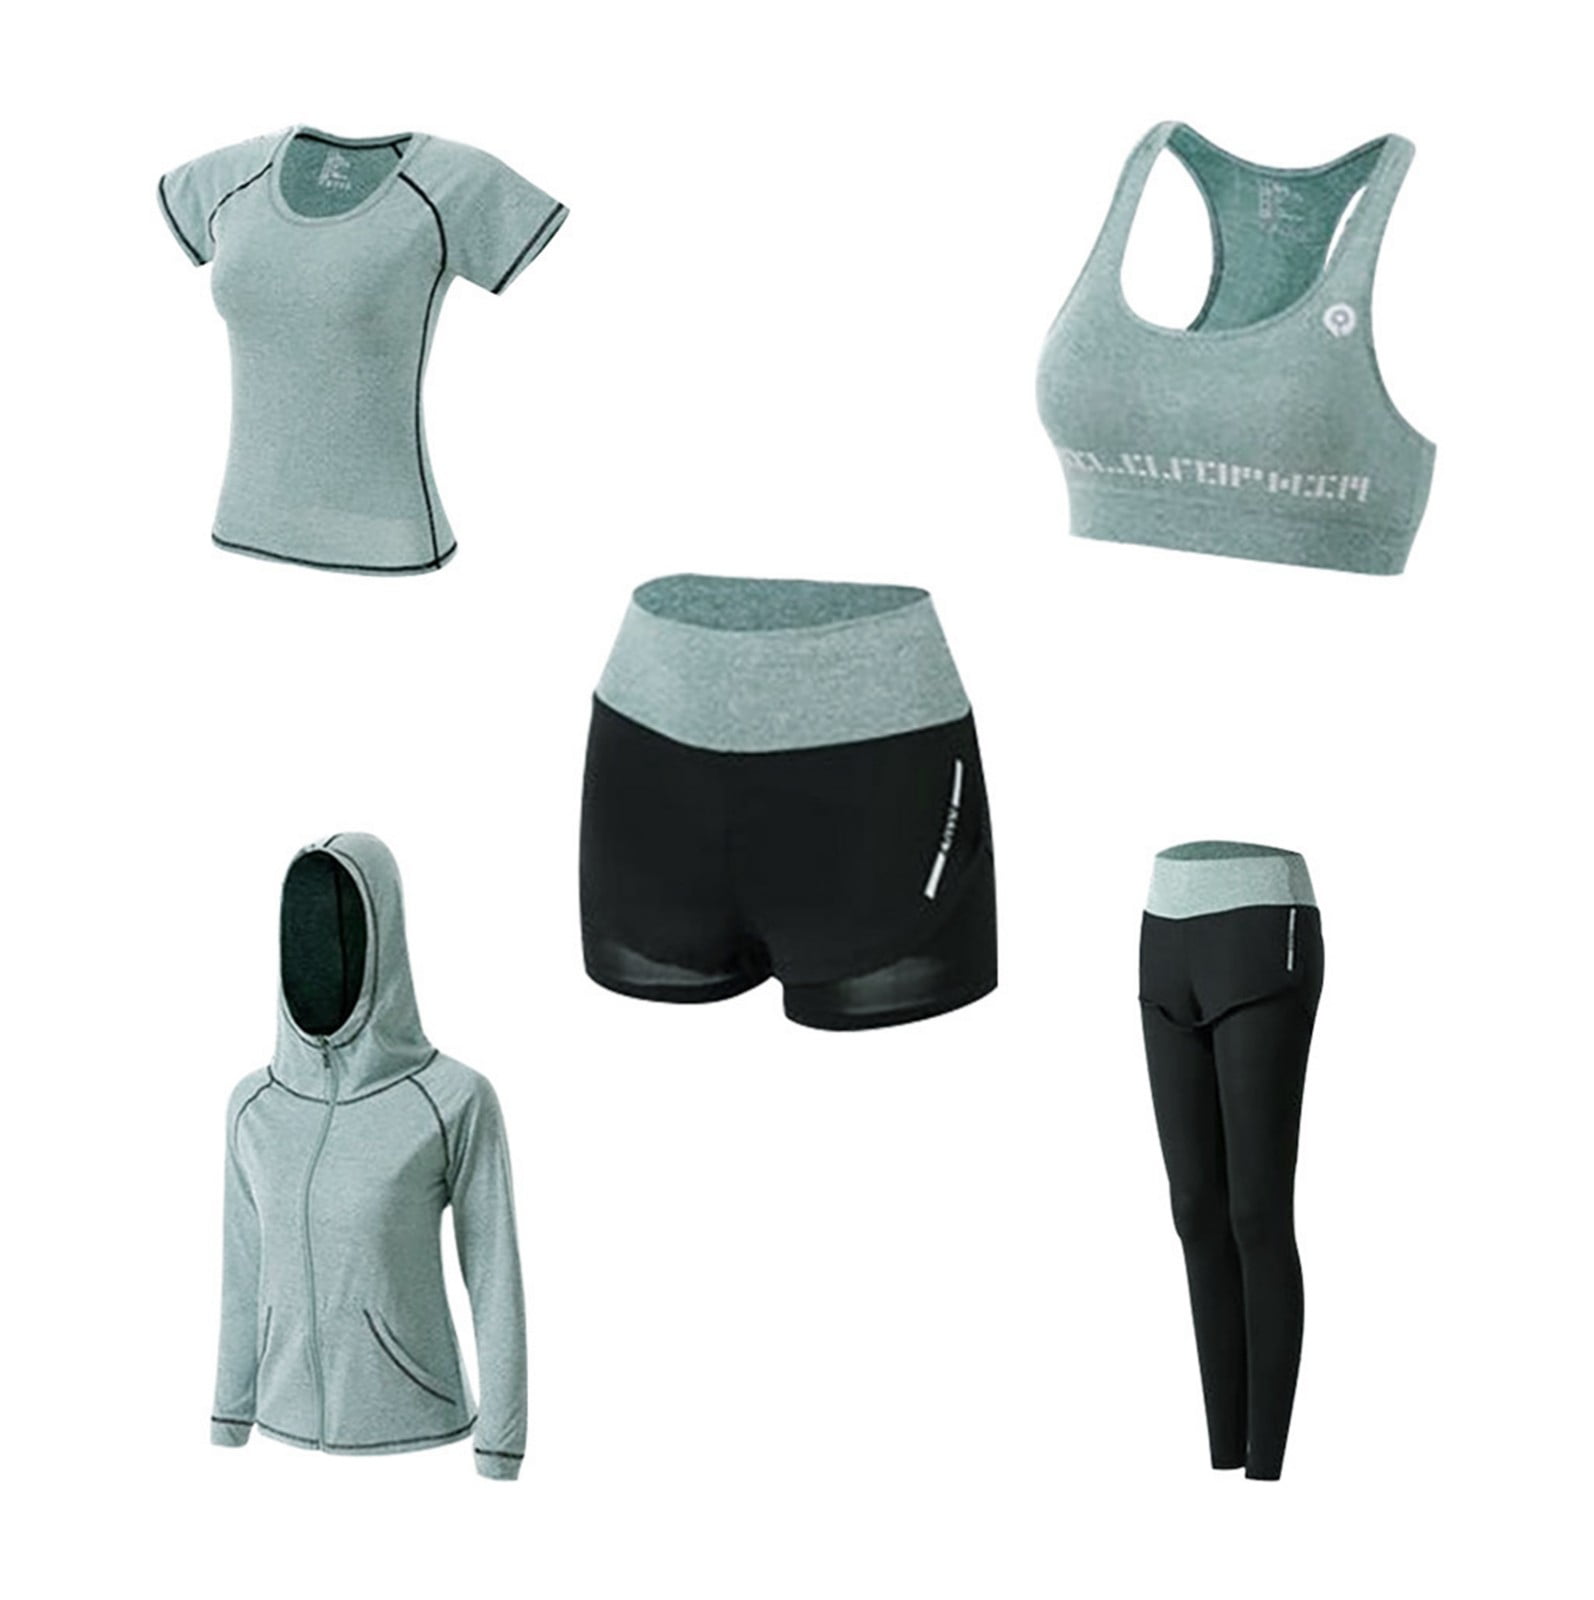 8 Top Sports Outfit For Winter Workout - Tradeindia